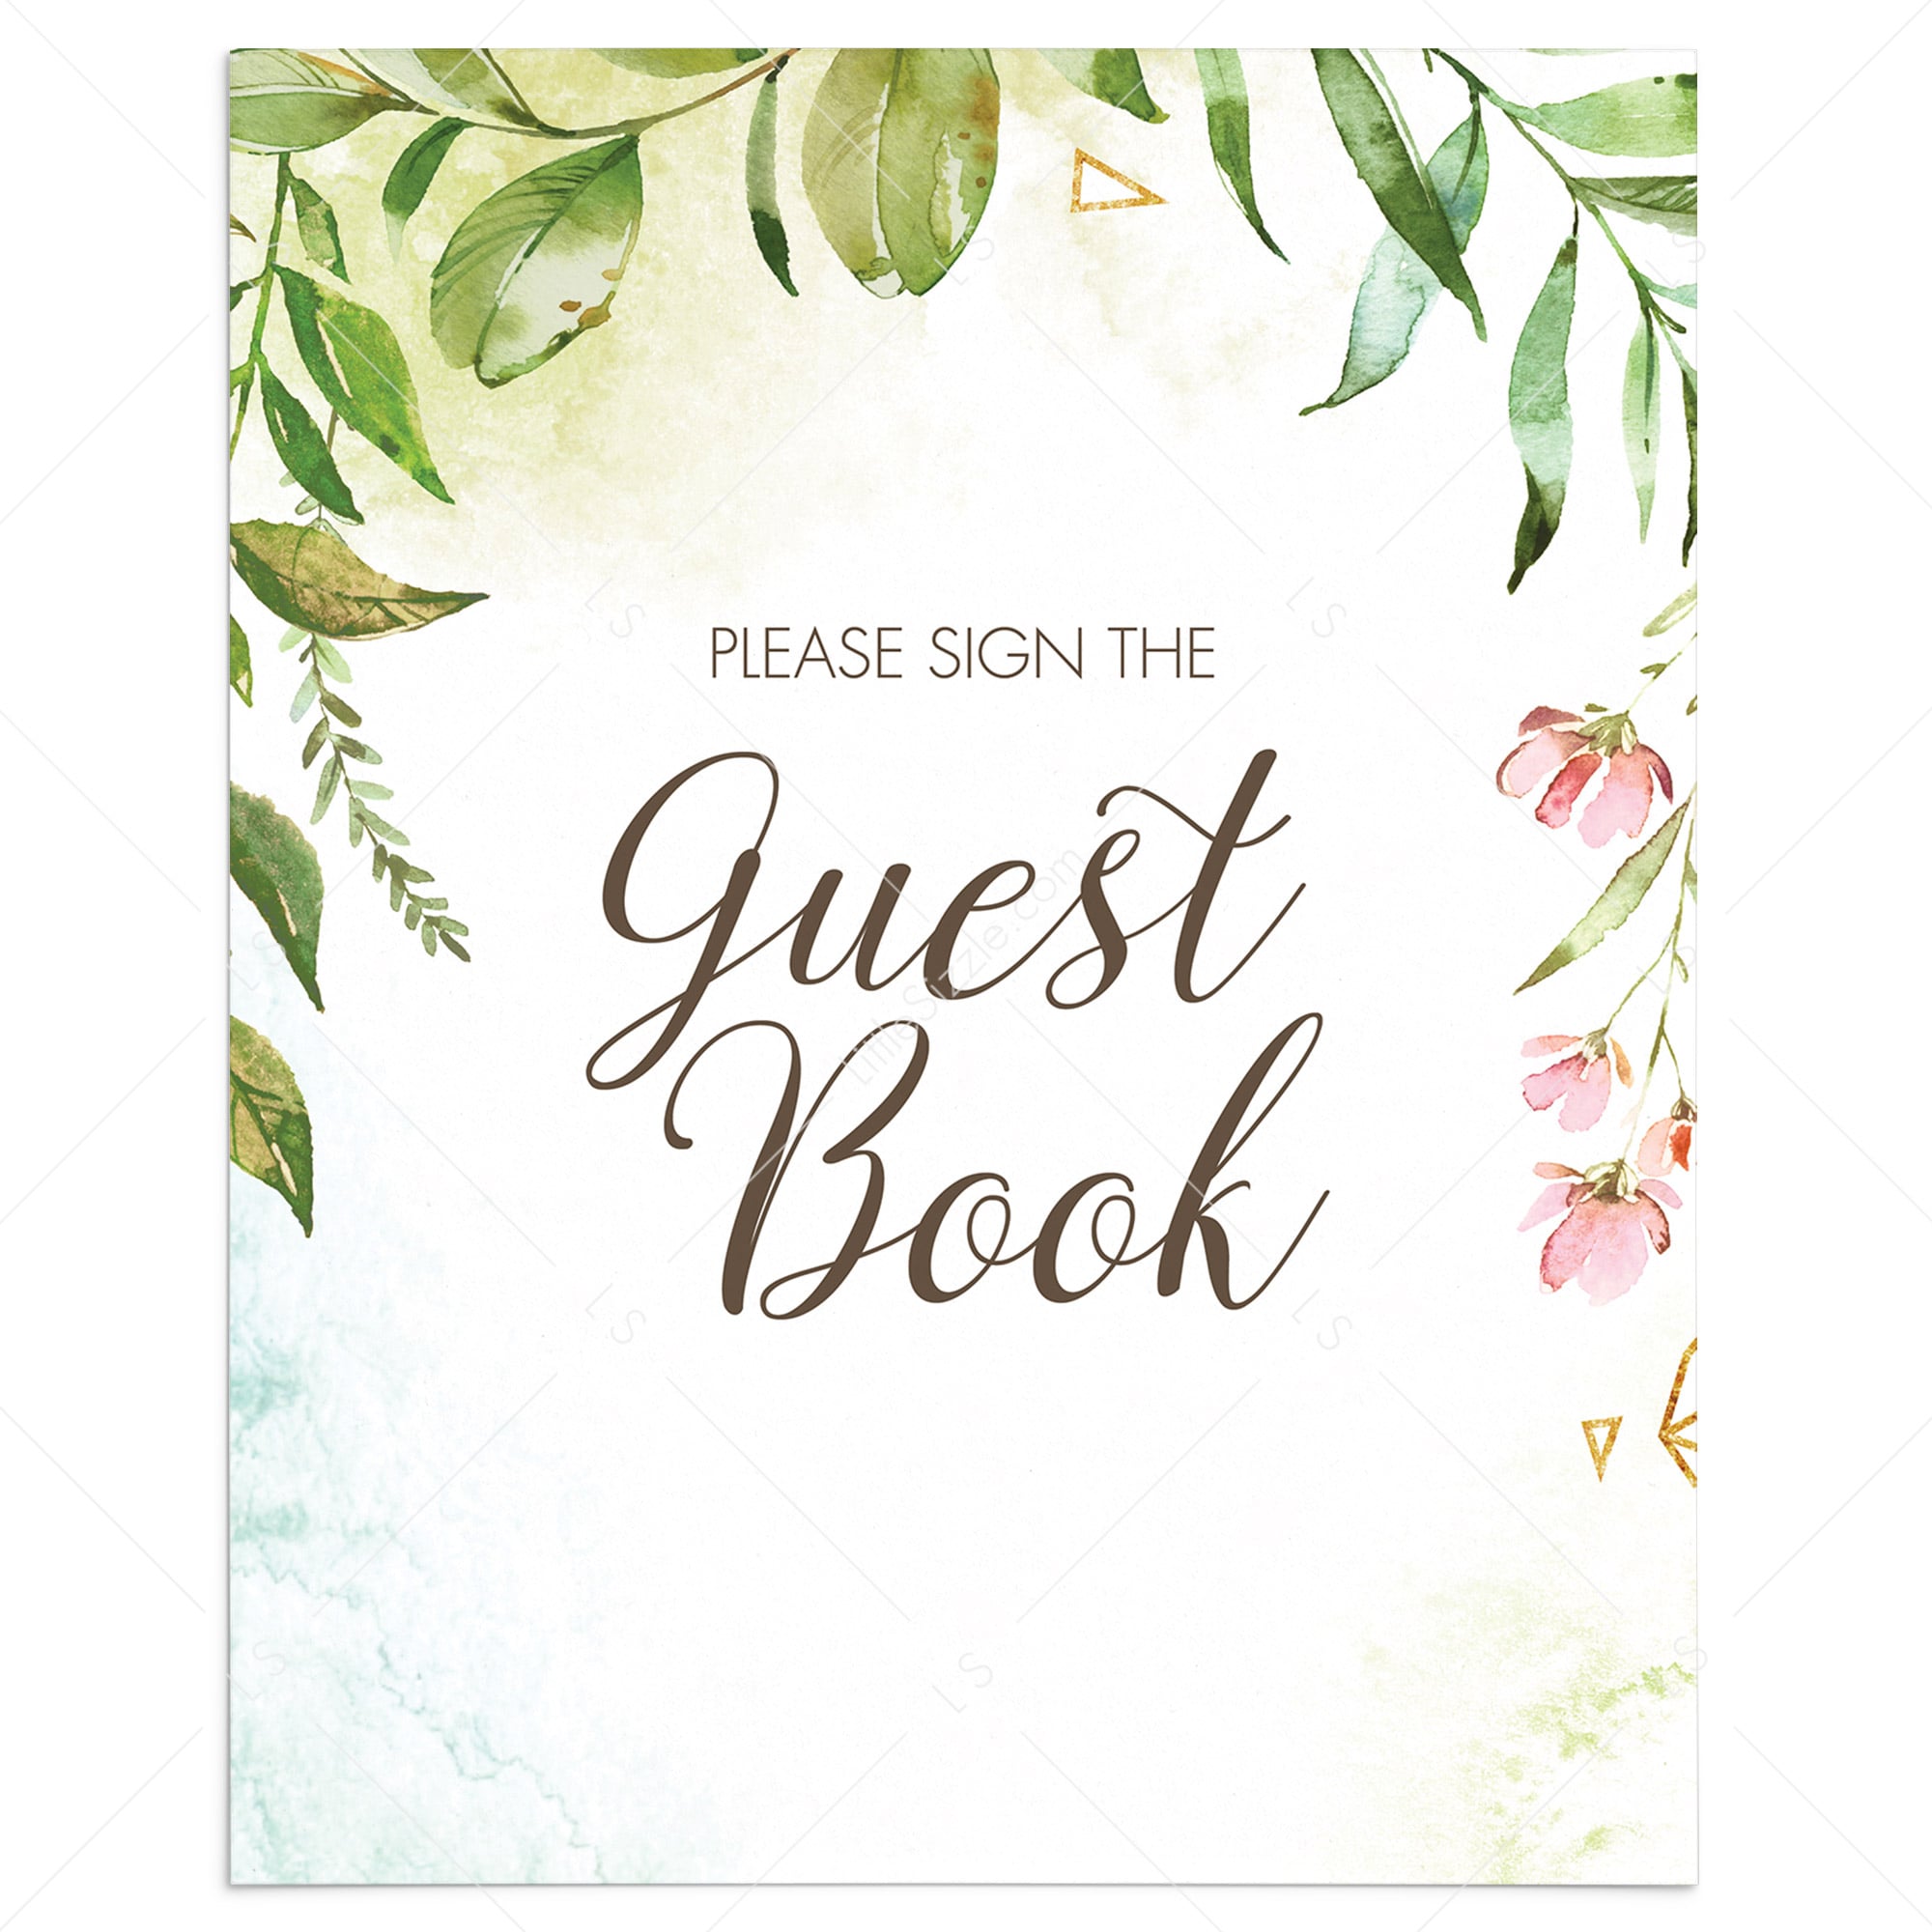 Baby shower guest book sign printable garden themed by LittleSizzle